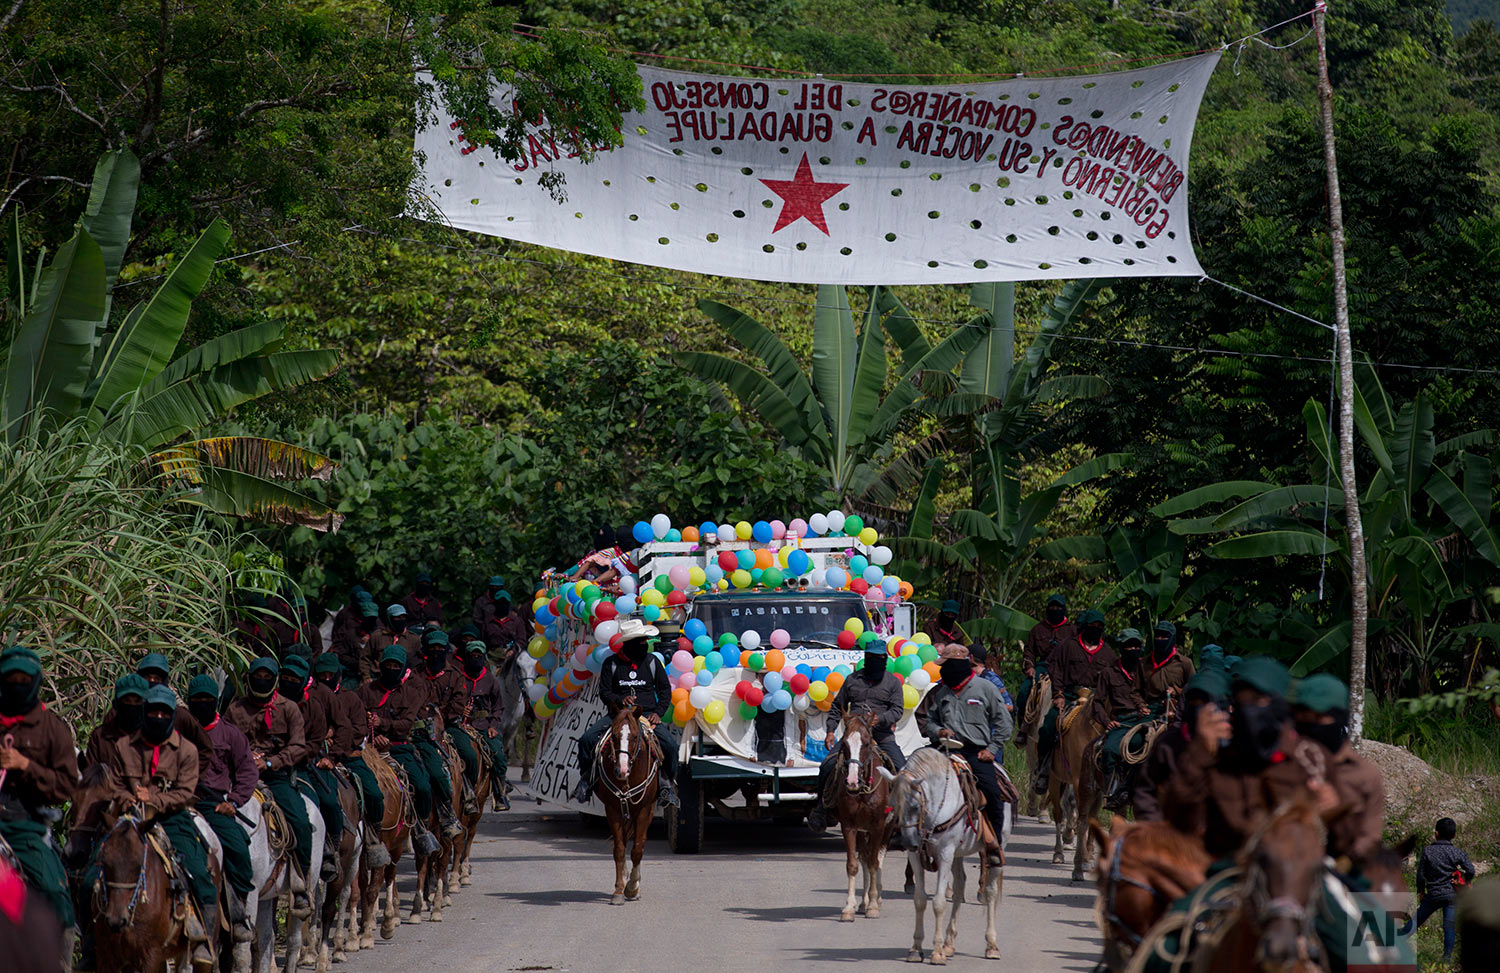  In this Saturday, Oct. 14, 2017 photo, horse riding members of the Zapatista National Liberation Army (EZLN) escort Maria de Jesus Patricio, presidential candidate for the National Indigenous Congress, as she campaigns in the Zapatista stronghold of